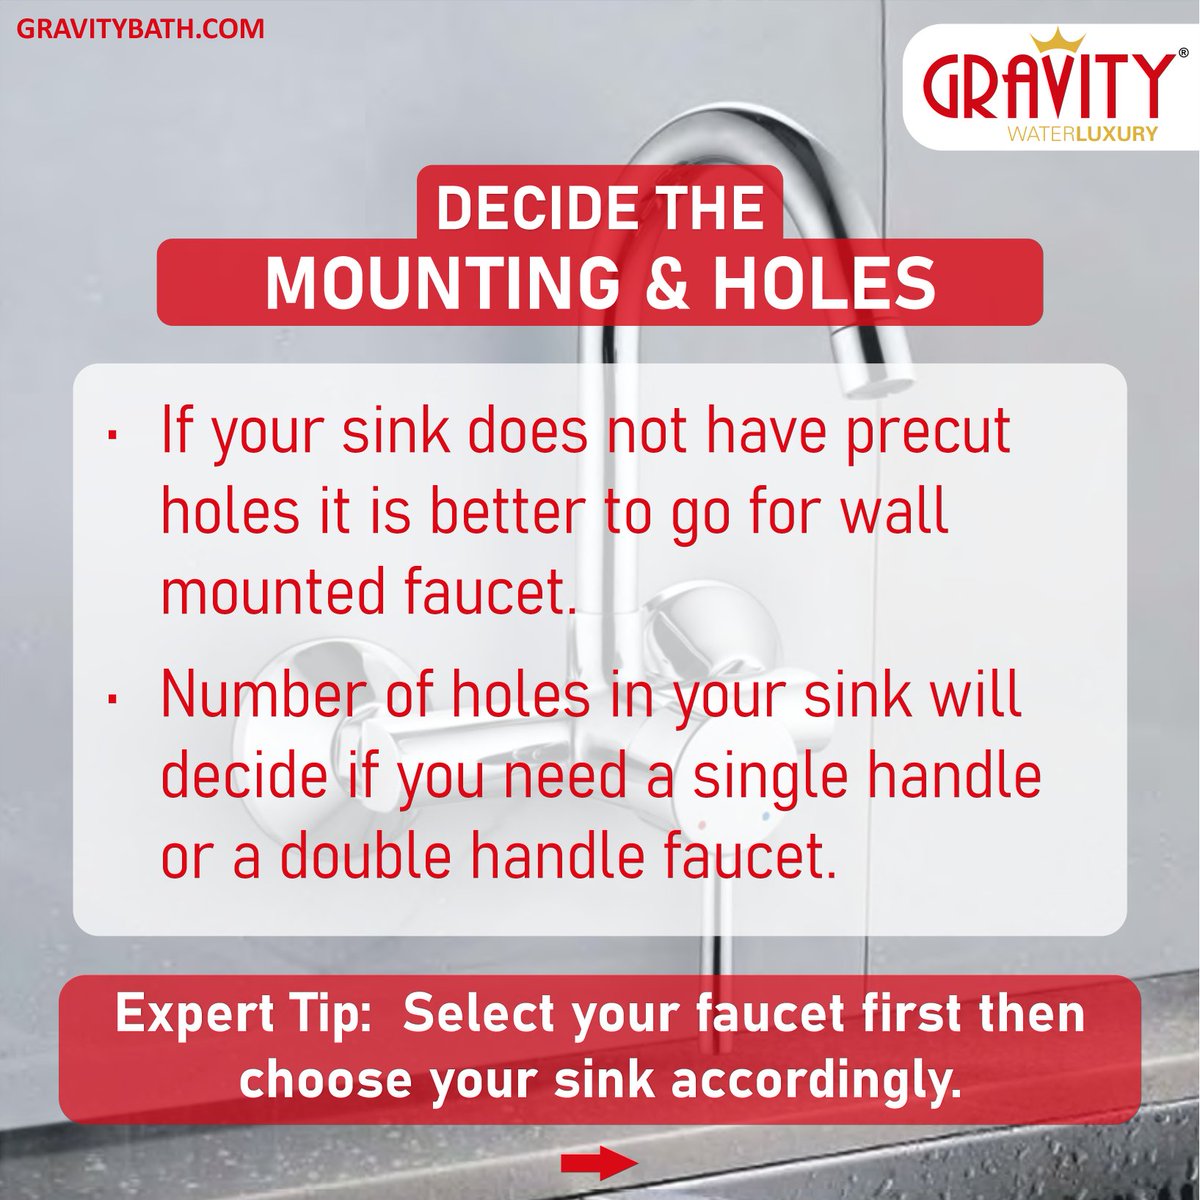 Save this and thank us later. With these points in mind you will surely make the right choice with your kitchen faucet.

#kitchenfaucet #gravitybath #kitchensink #faucets #bathroomfittings #kitchenmakeover